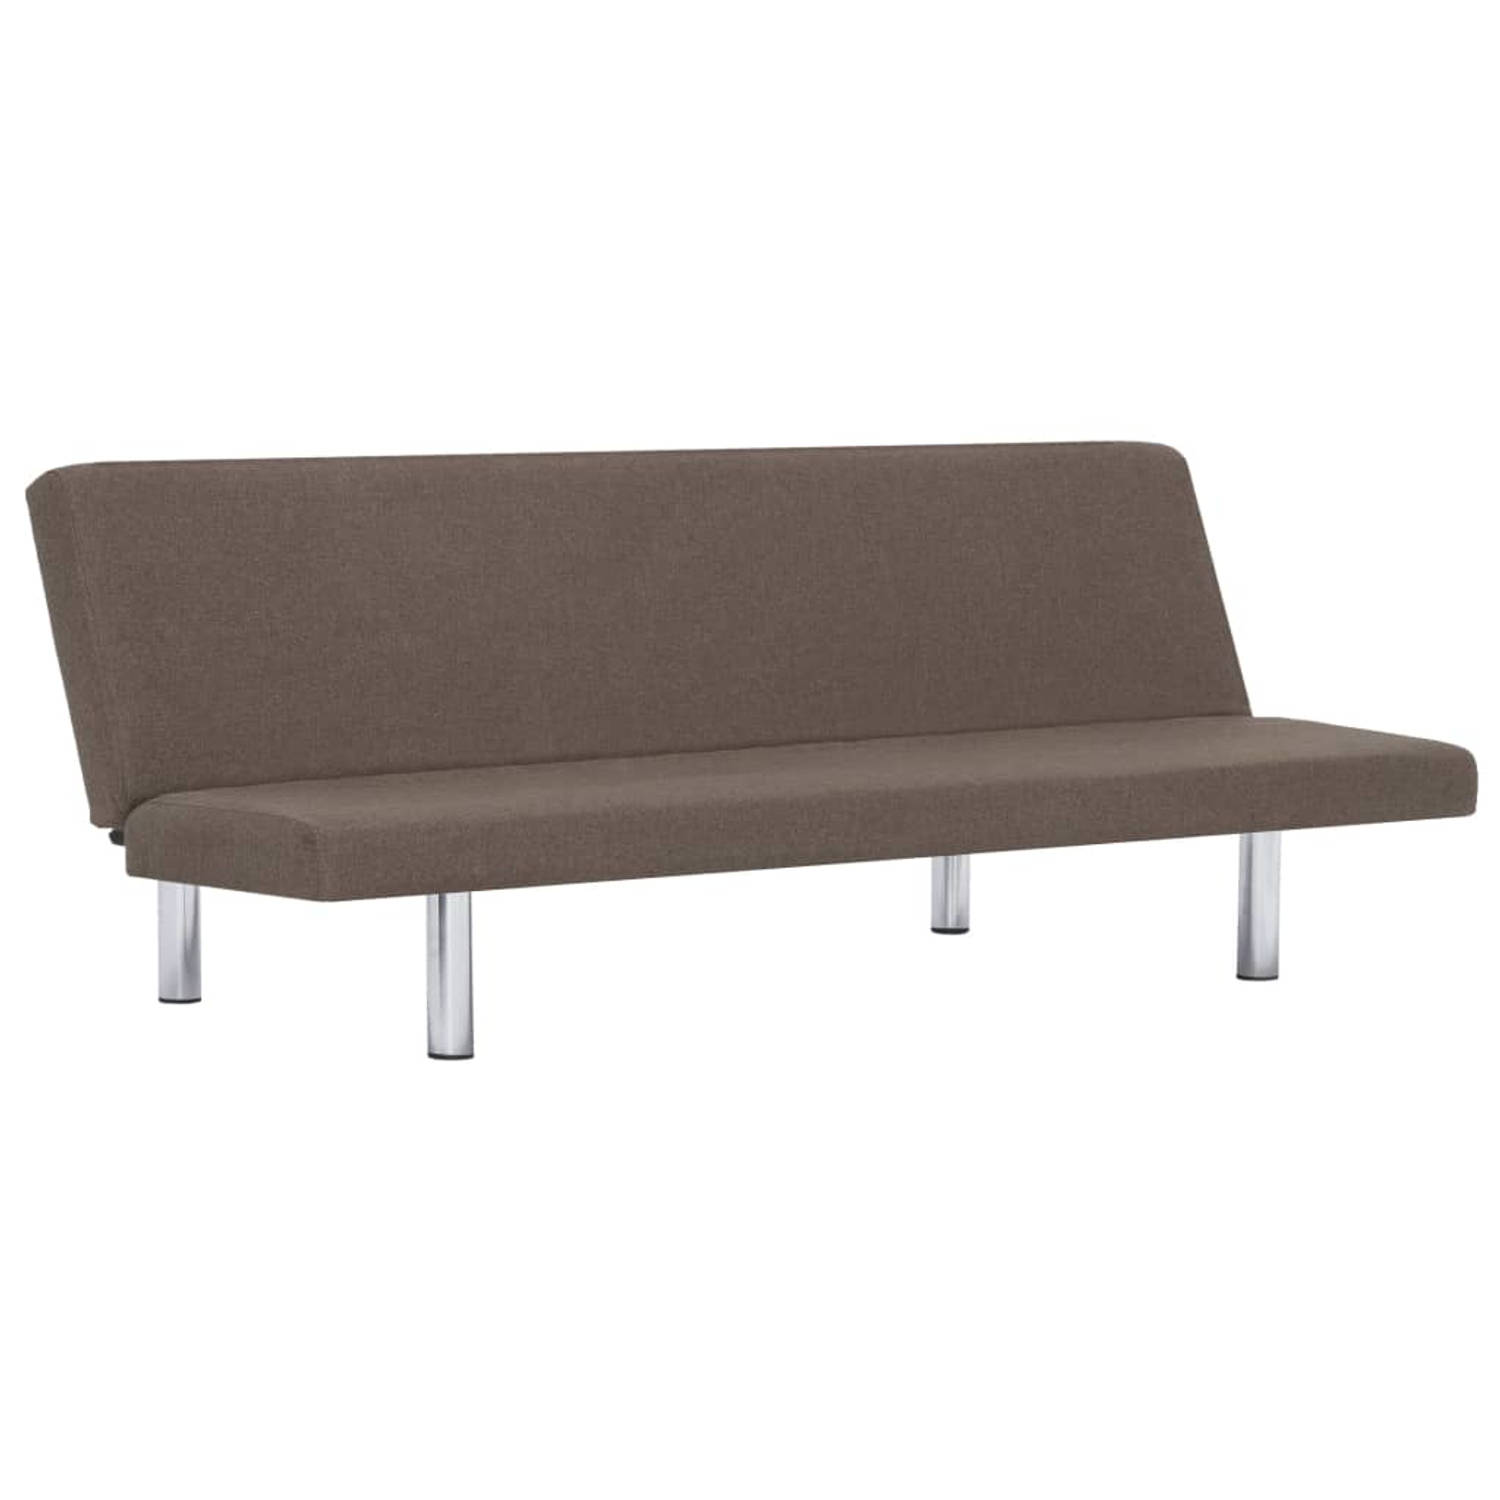 The Living Store Slaapbank polyester taupe